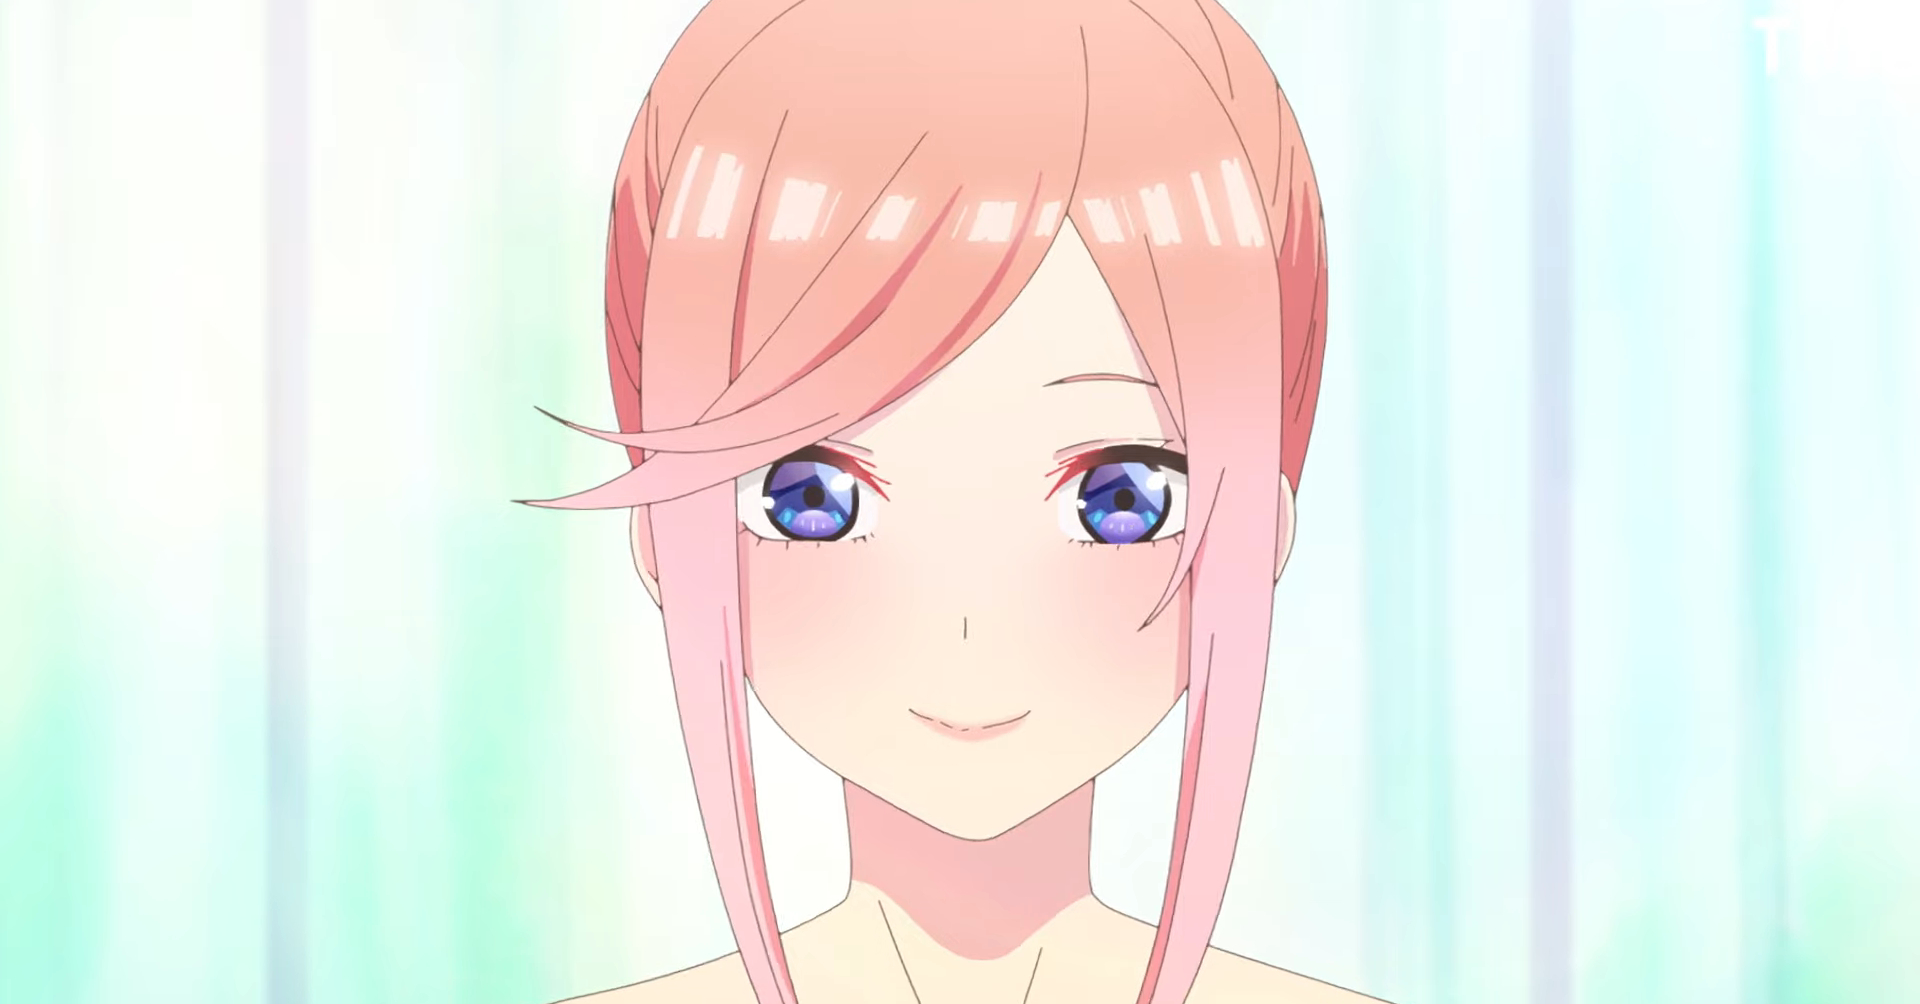 New Quintessential Quintuplets Anime by Shaft Reveals Creditless